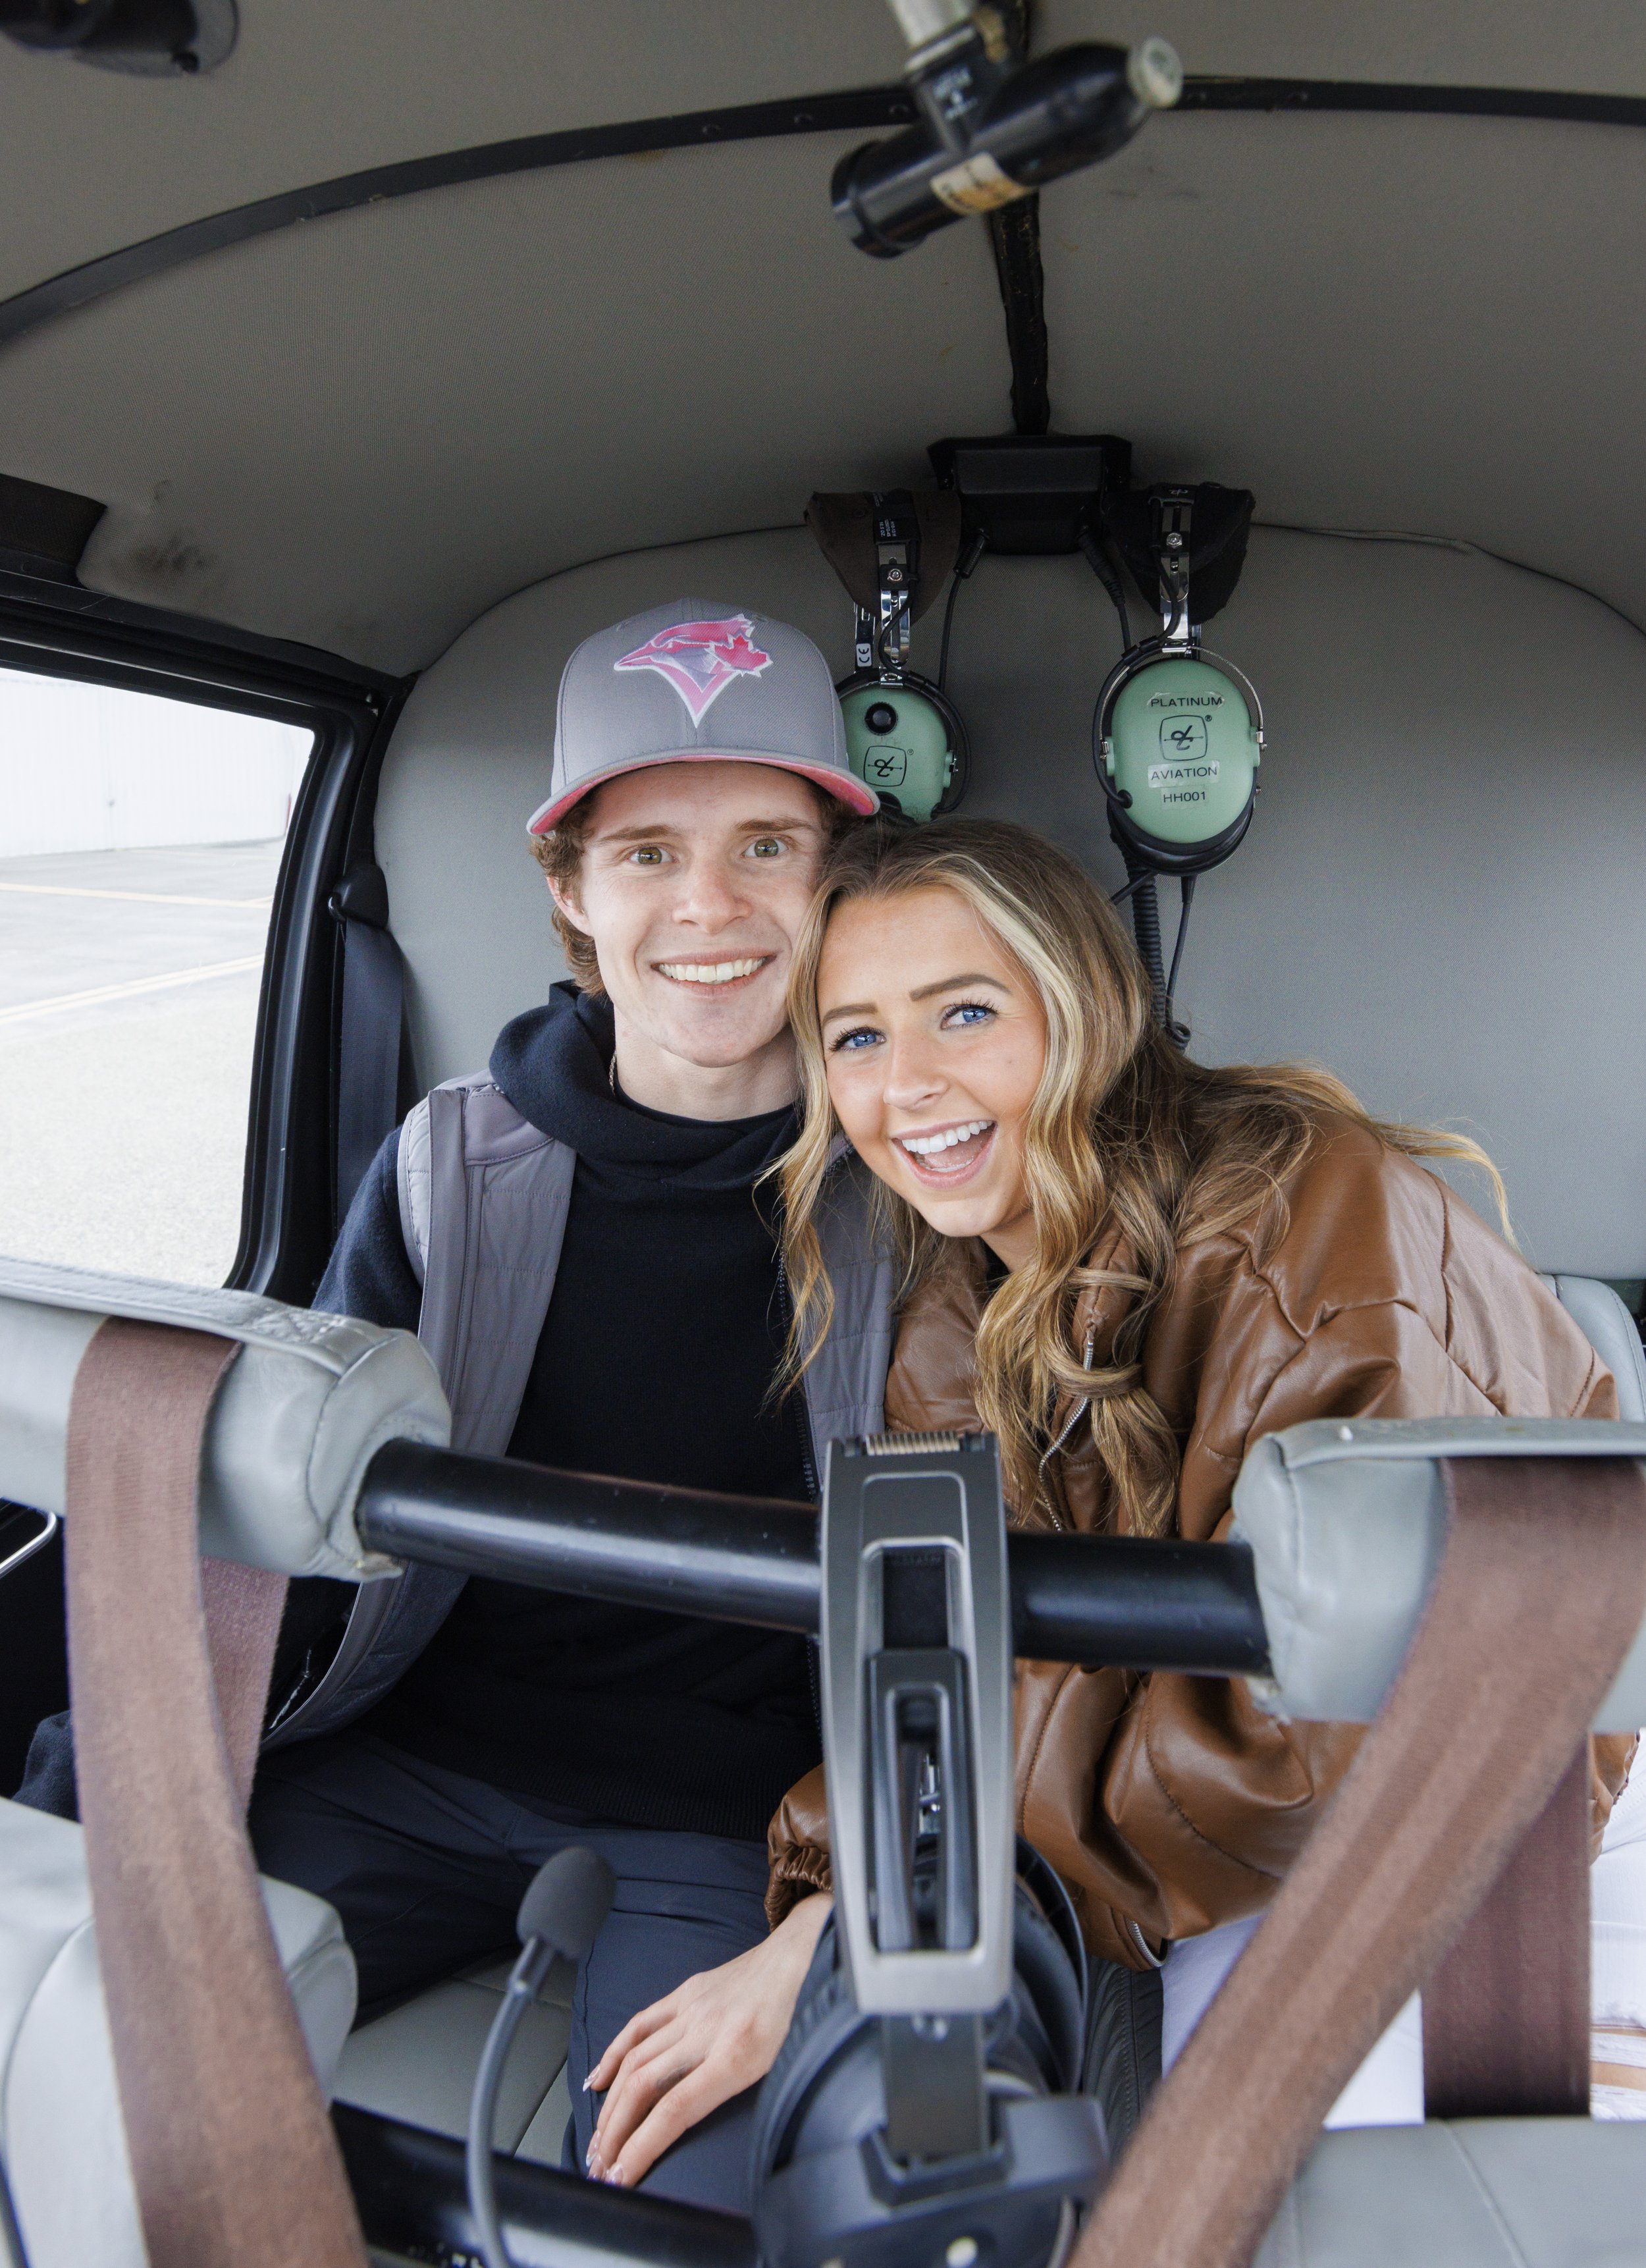  The engagement photographer captures a couple snuggled together in a helicopter by Savanna Richardson Photography. happy couple she said yes proposal photography #SavannaRichardsonPhotography #SavannaRichardsonEngagements #utahproposals #helicopterp